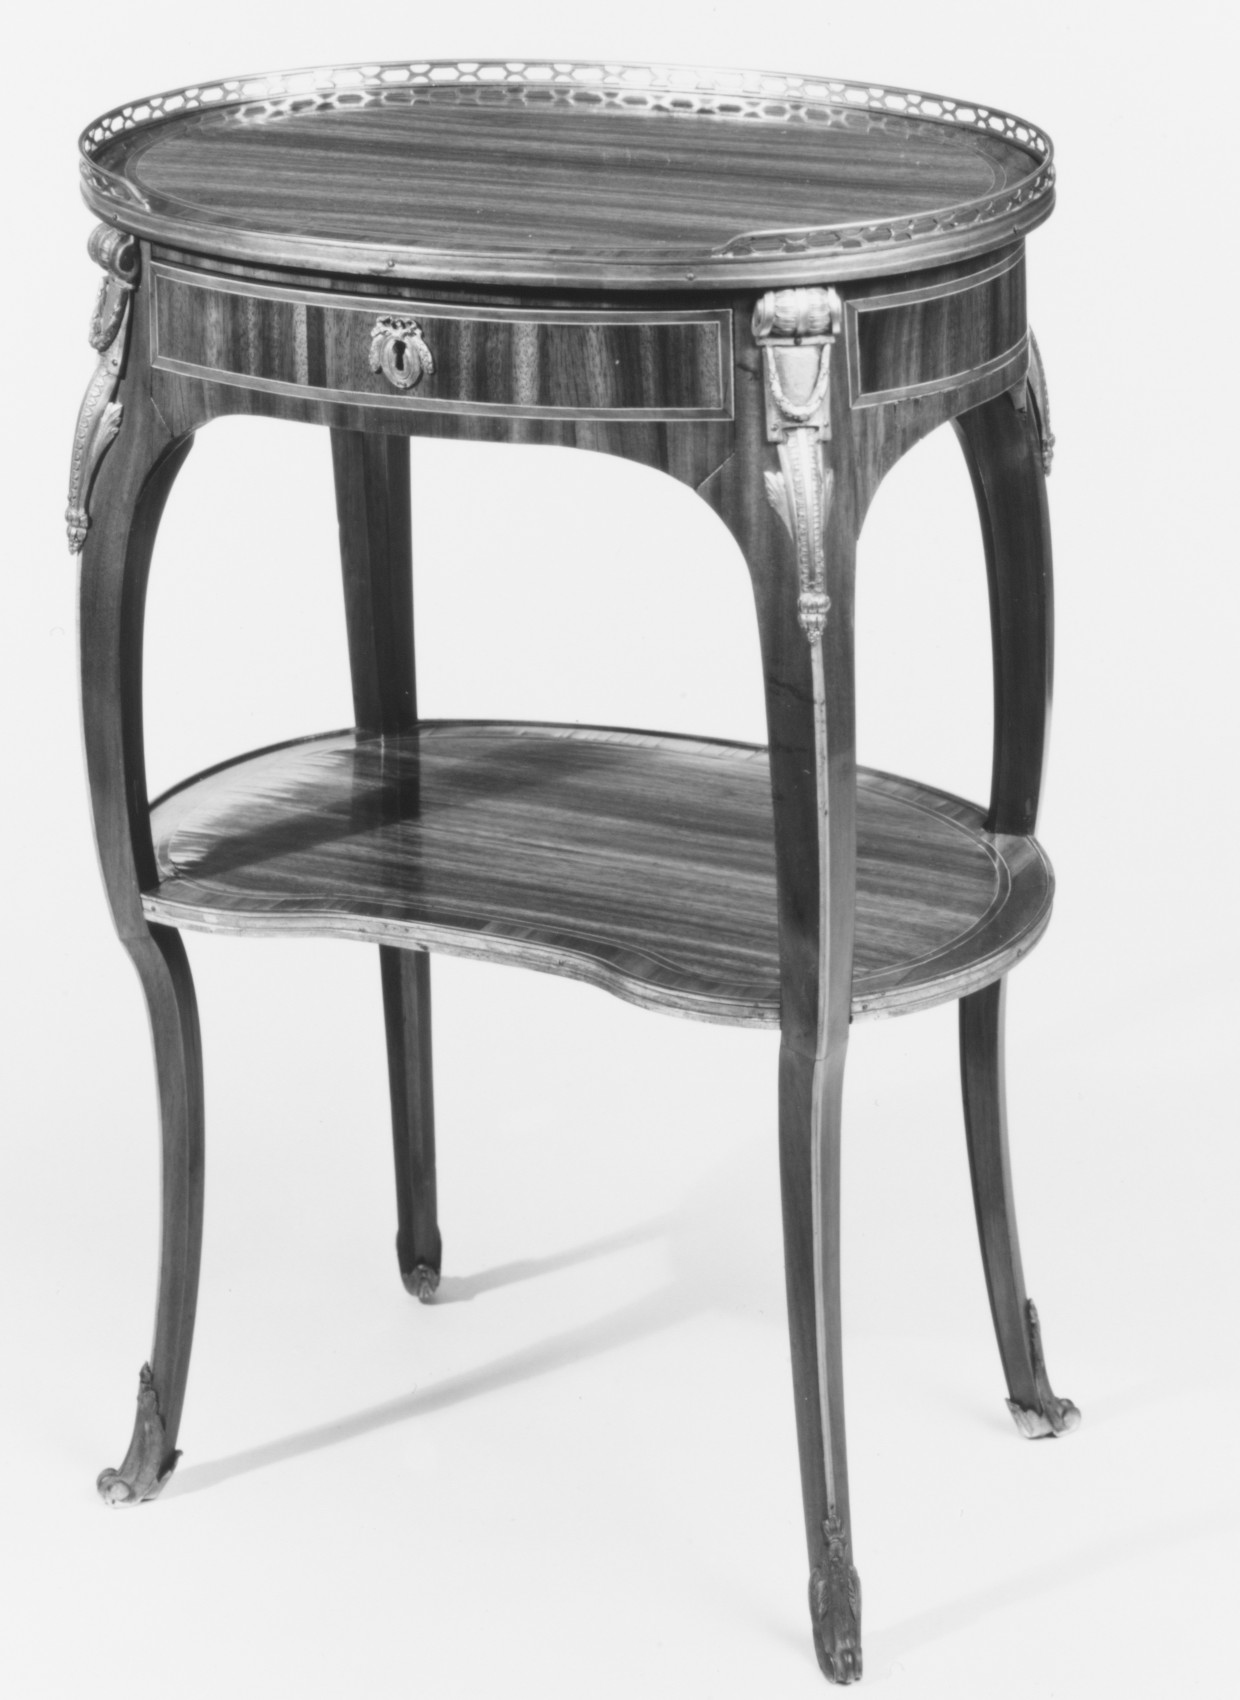 Roger Vandercruse, called Lacroix | Small oval writing table (one of a  pair) | French, Paris | The Metropolitan Museum of Art